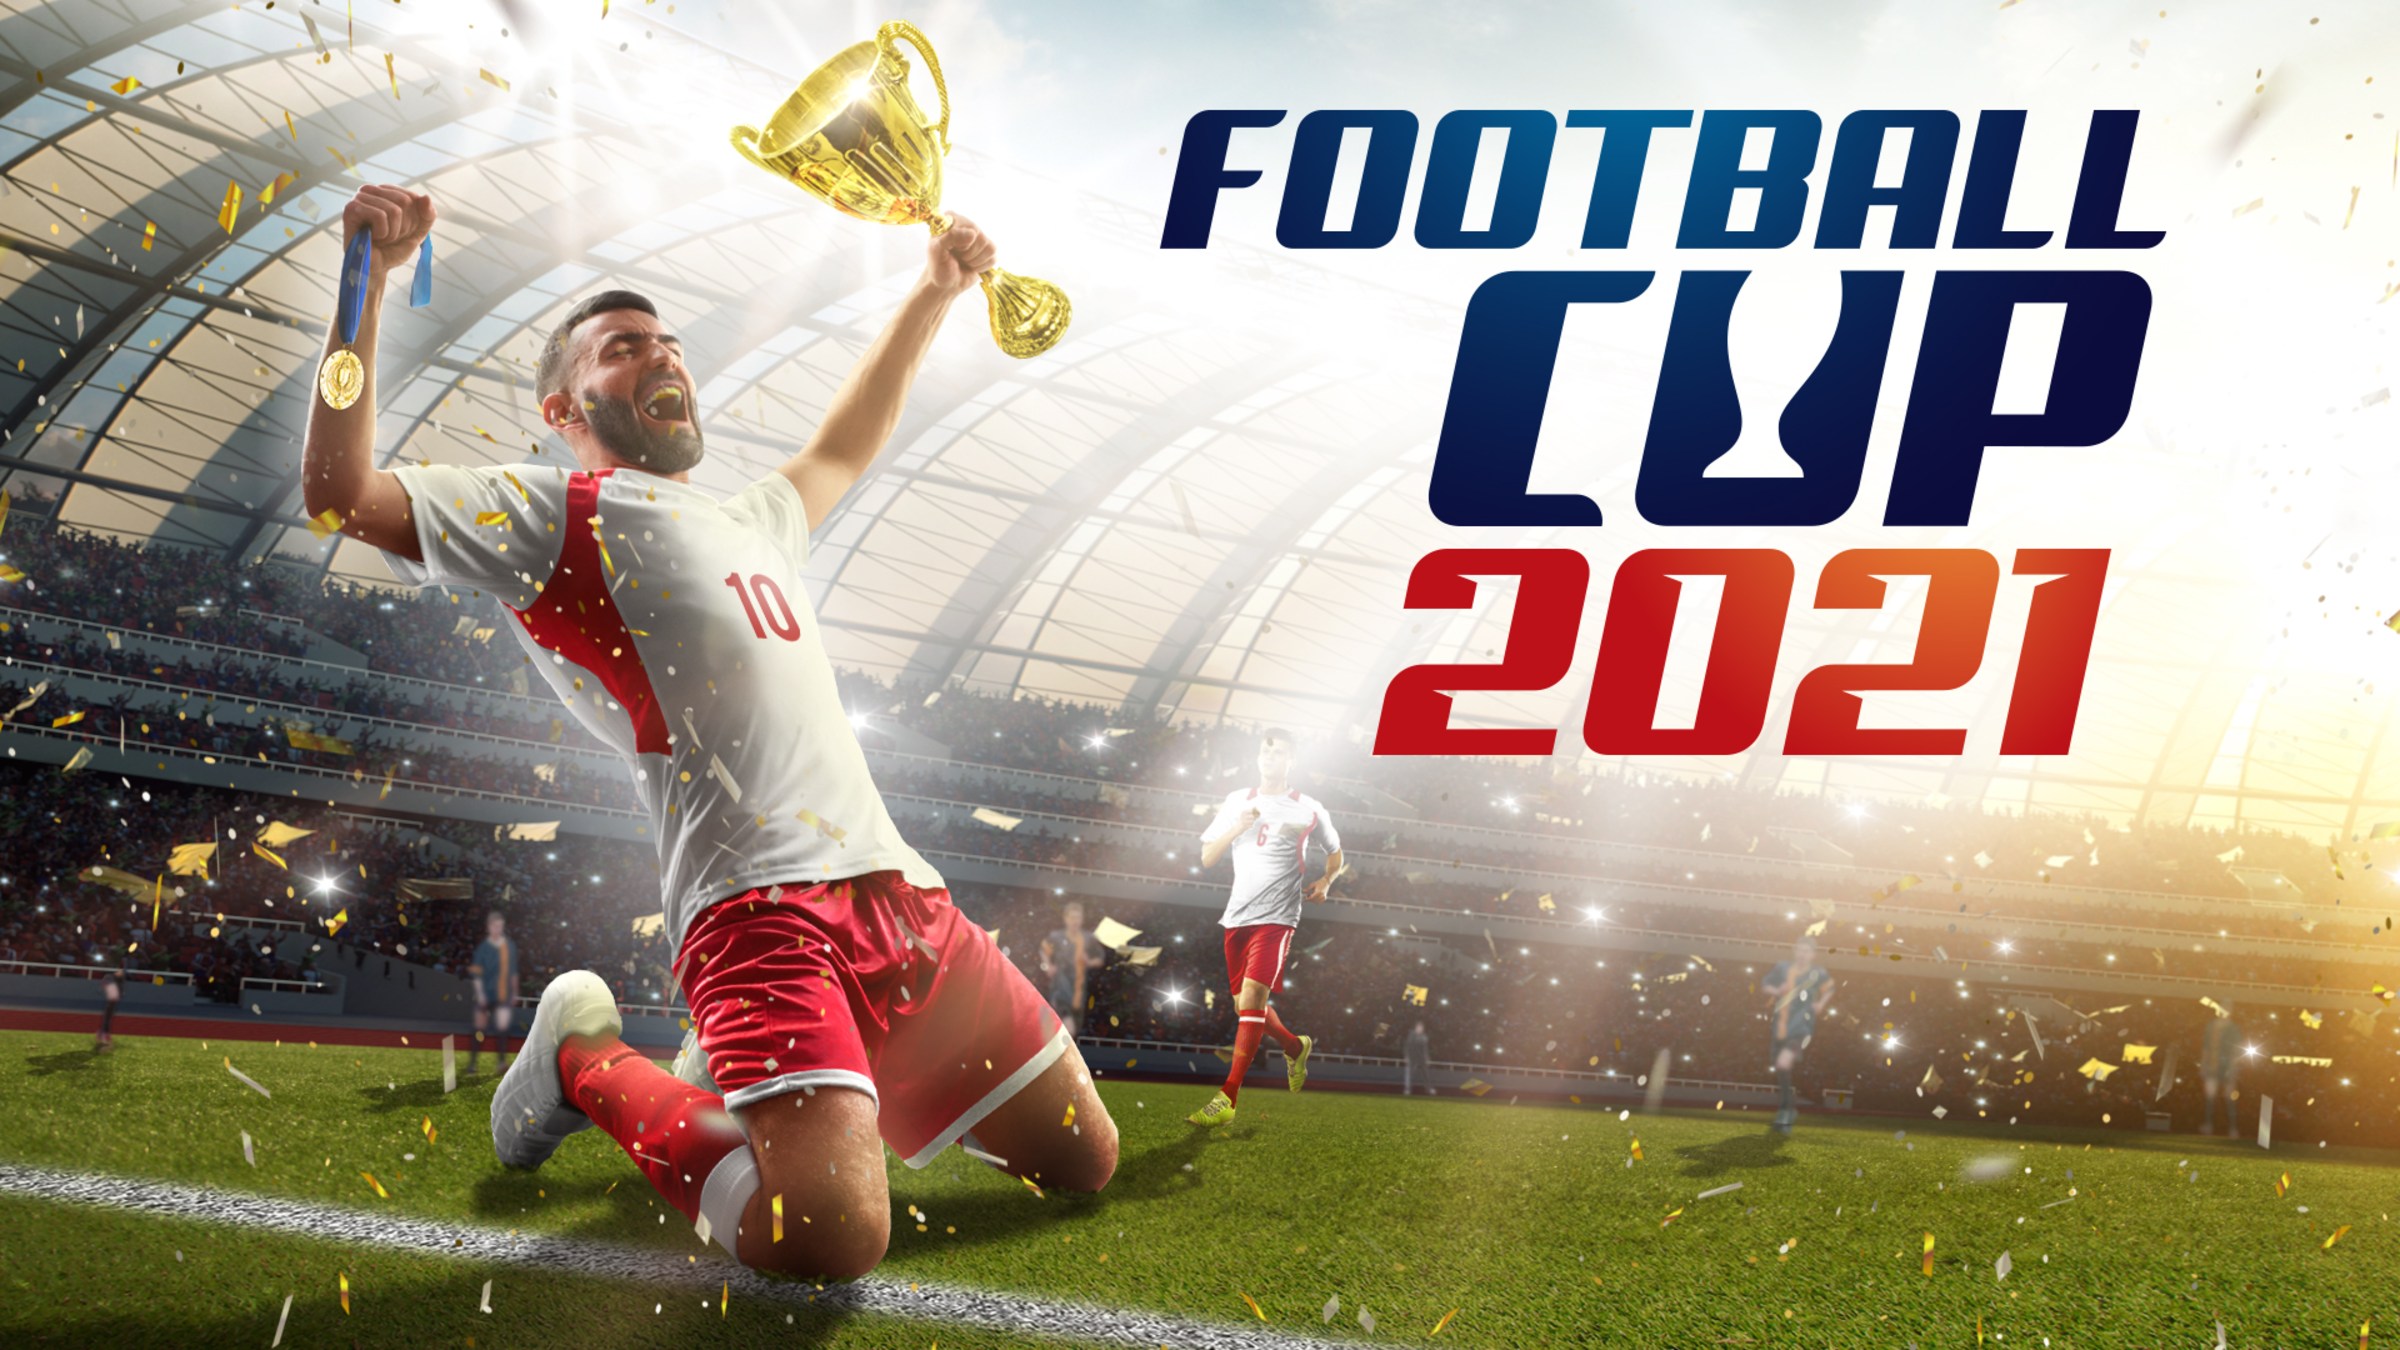 Football Cup 2021 for Nintendo Switch - Nintendo Official Site